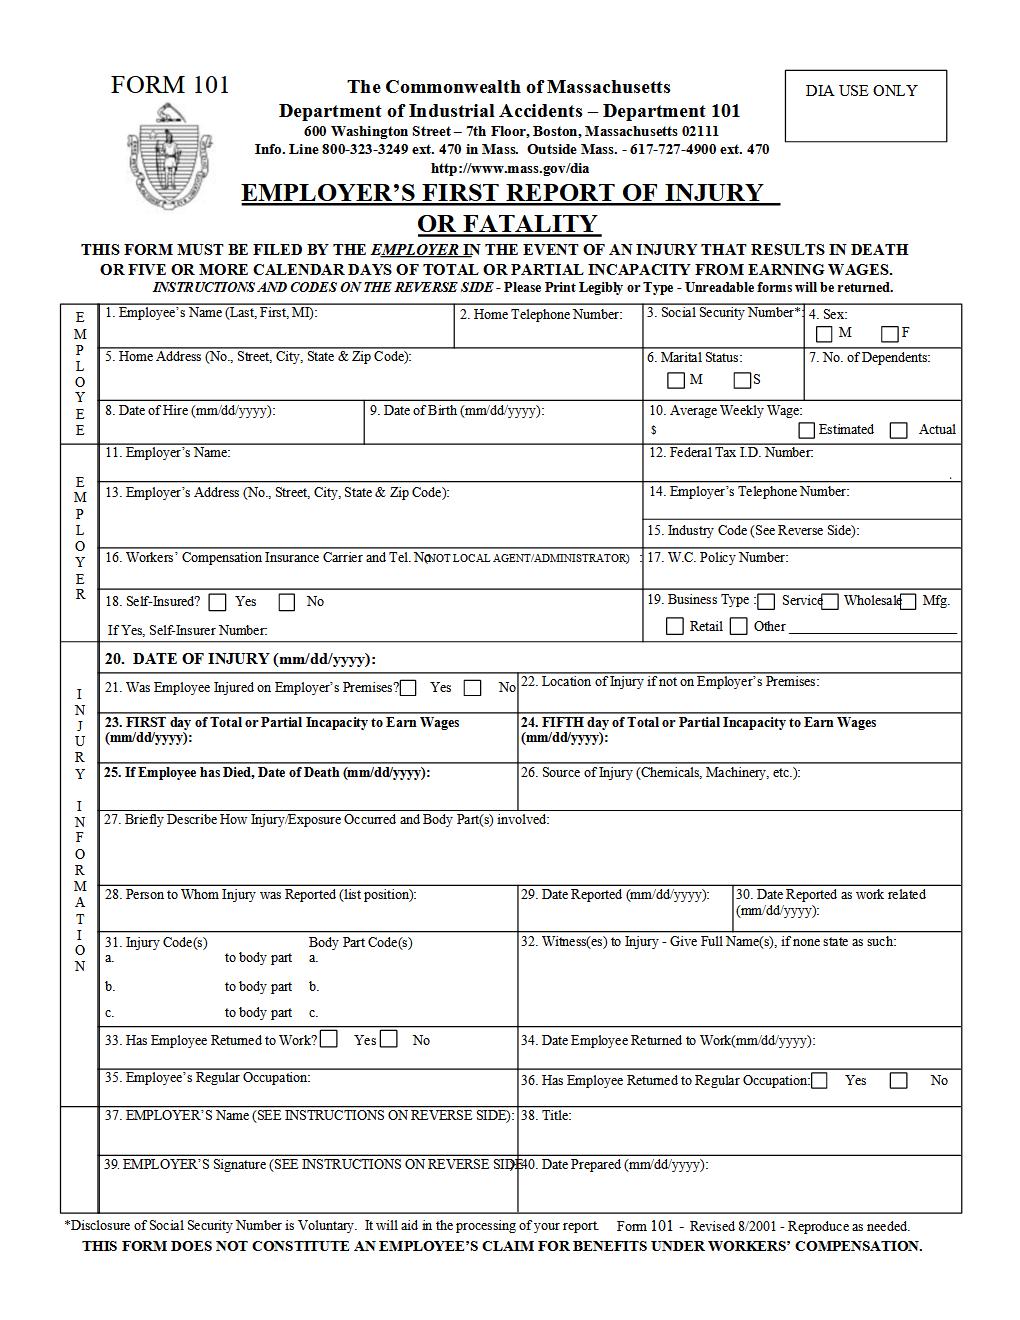 ACCIDENT REPORT FORM (MA FORM 101)